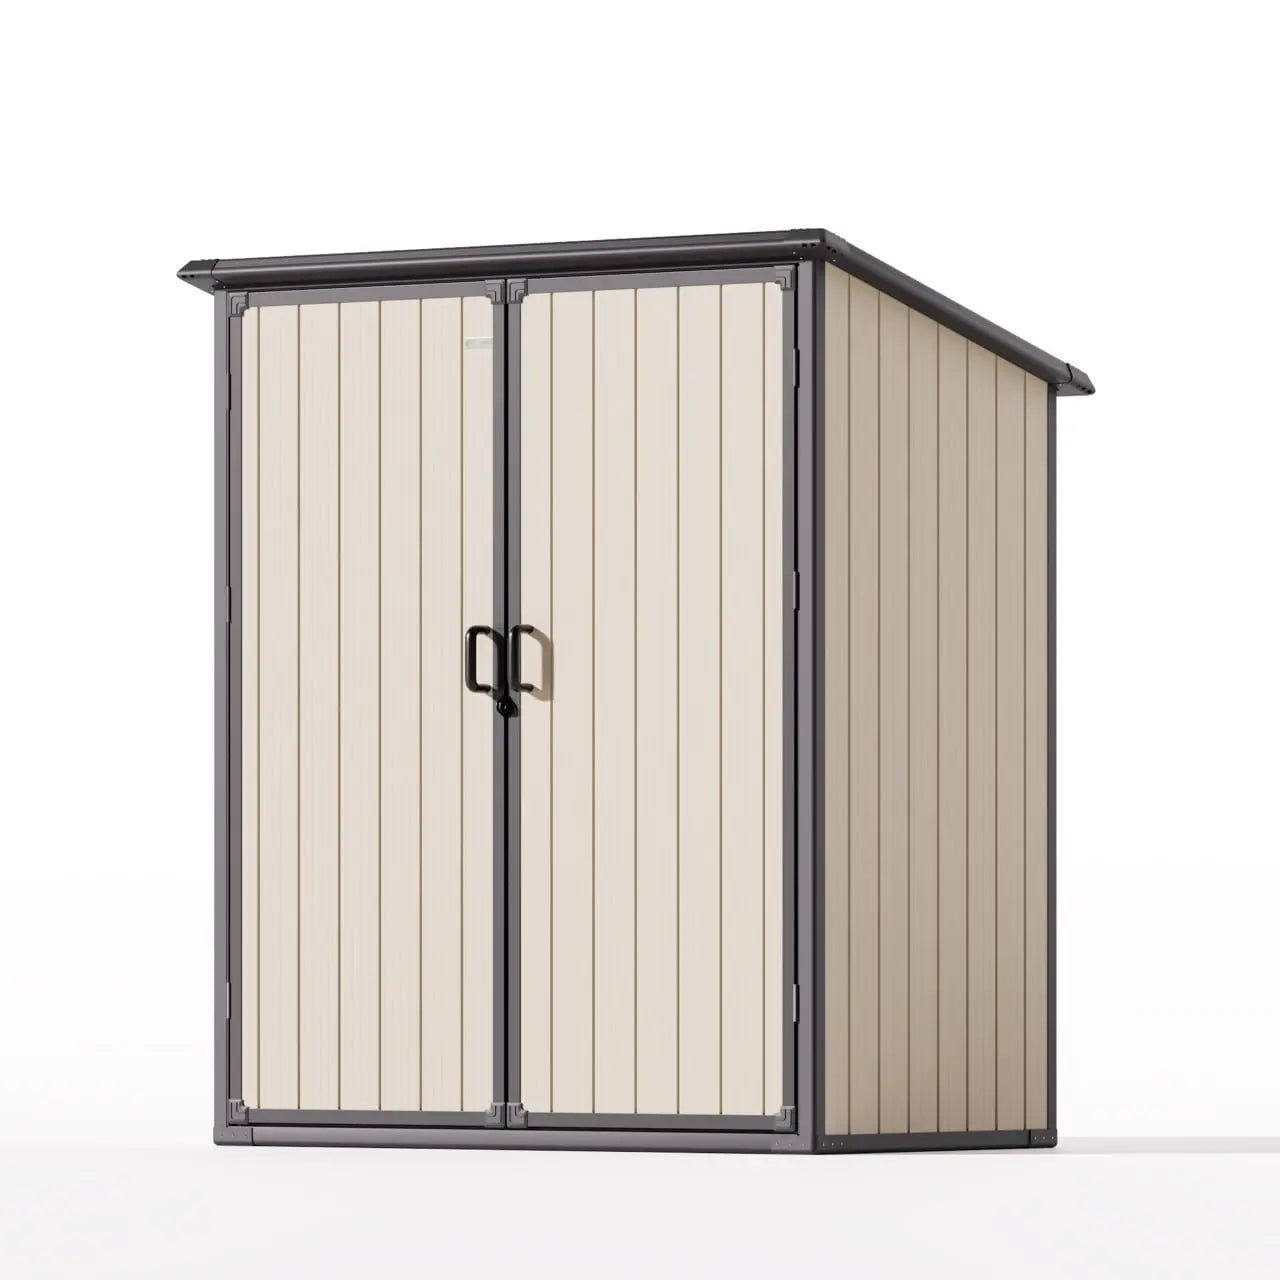 Patiowell 5x3 Plastic Vertical Shed Pro